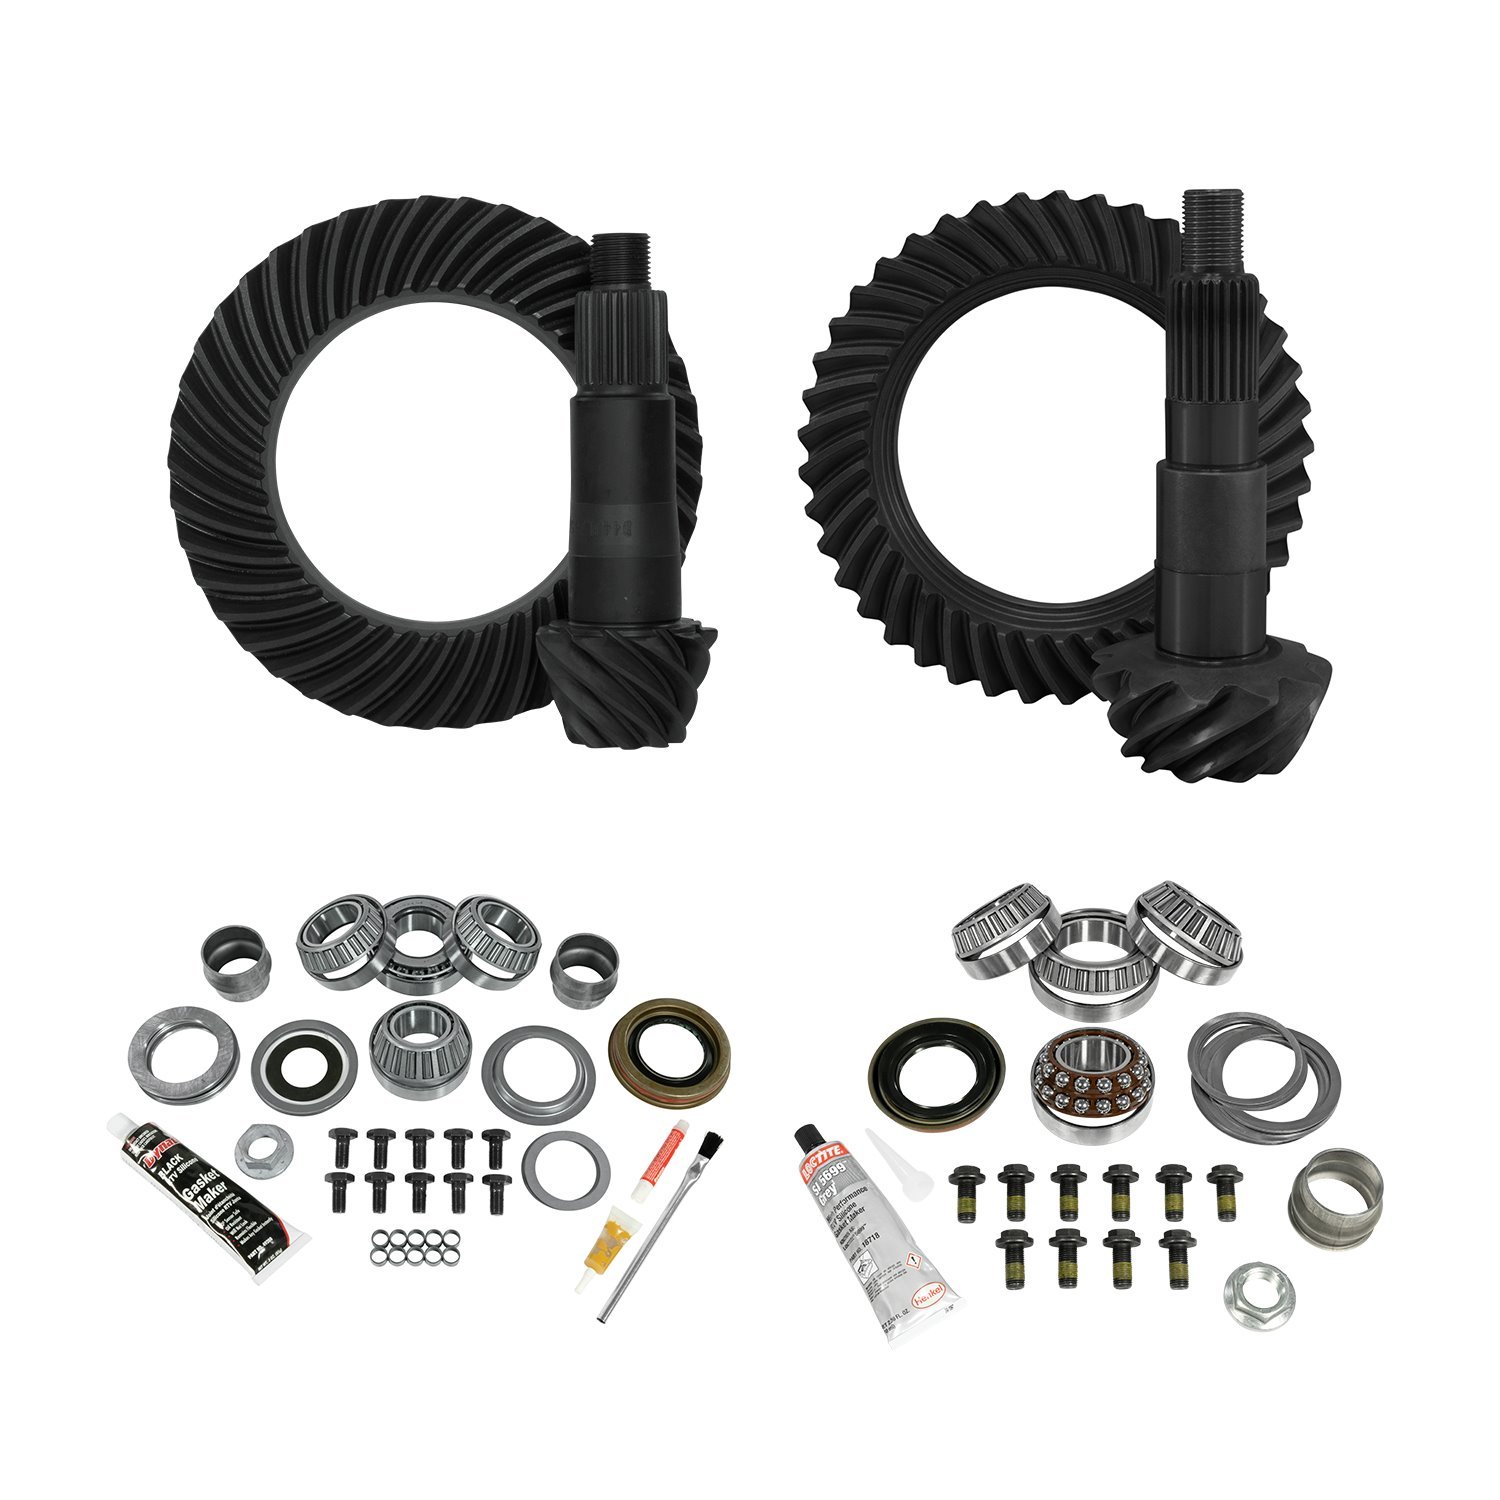 Re-Gear And Install Kit, D30 Front/D44 Rear, Jeep Jl Non-Rubicon, 5.13